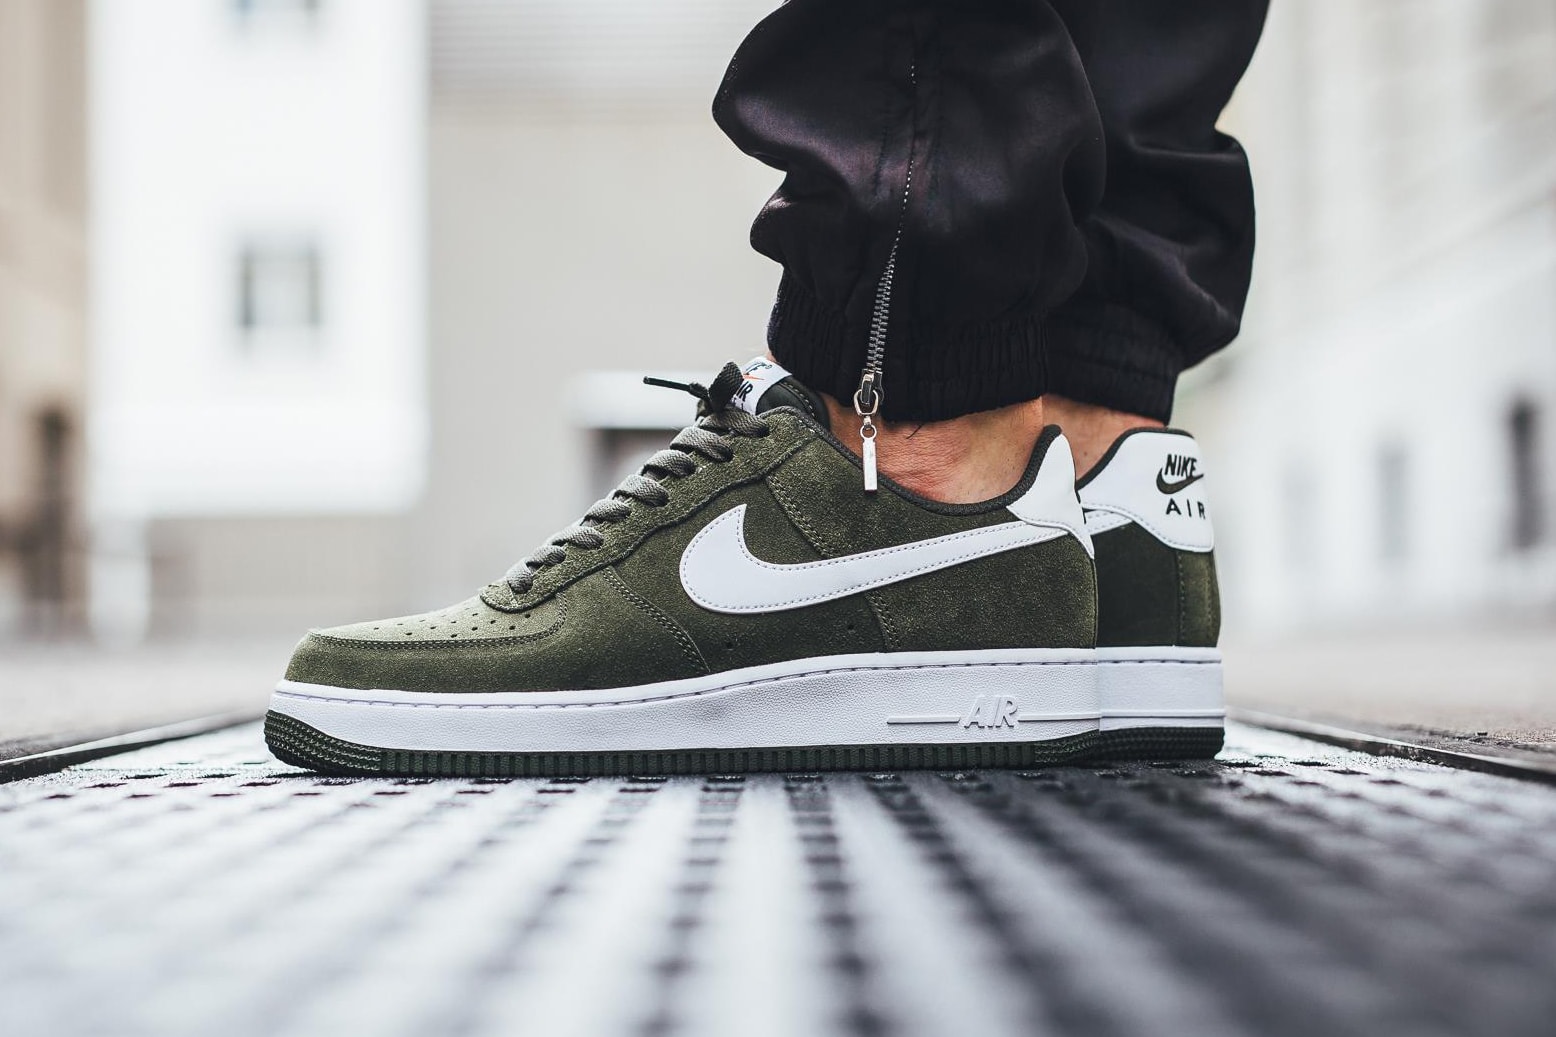 Nike Air Force 1 Low "Cargo Khaki" olive green